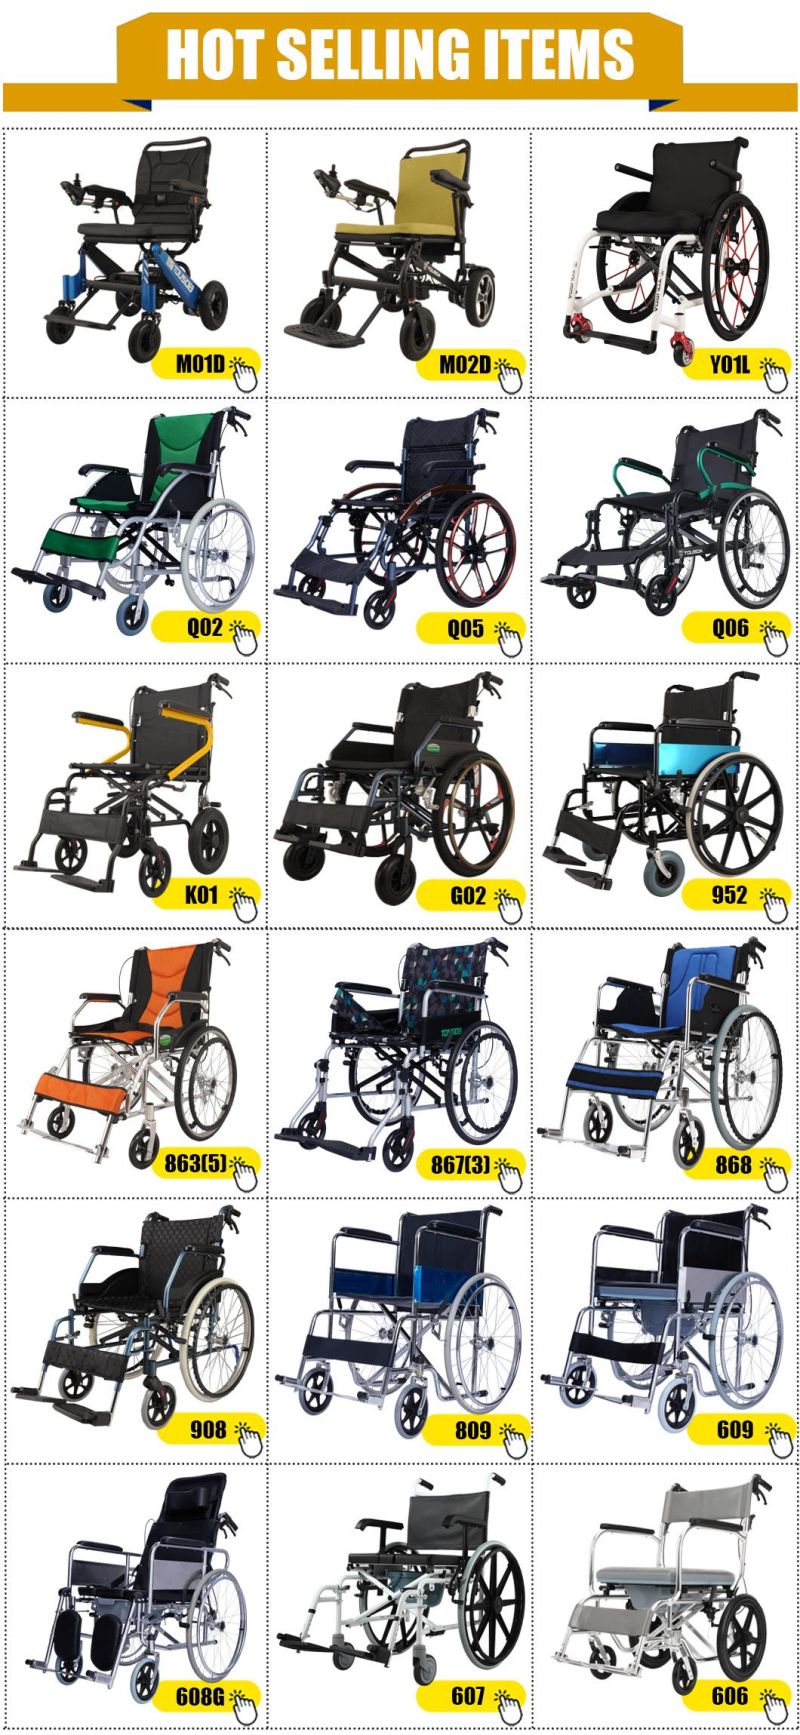 Tousda Factory High Quality Big Bariatric Mag Wheels Transfer Ultra Aluminum Folding Manual Power Electric Wheelchair /Disabled Mobility Scooter